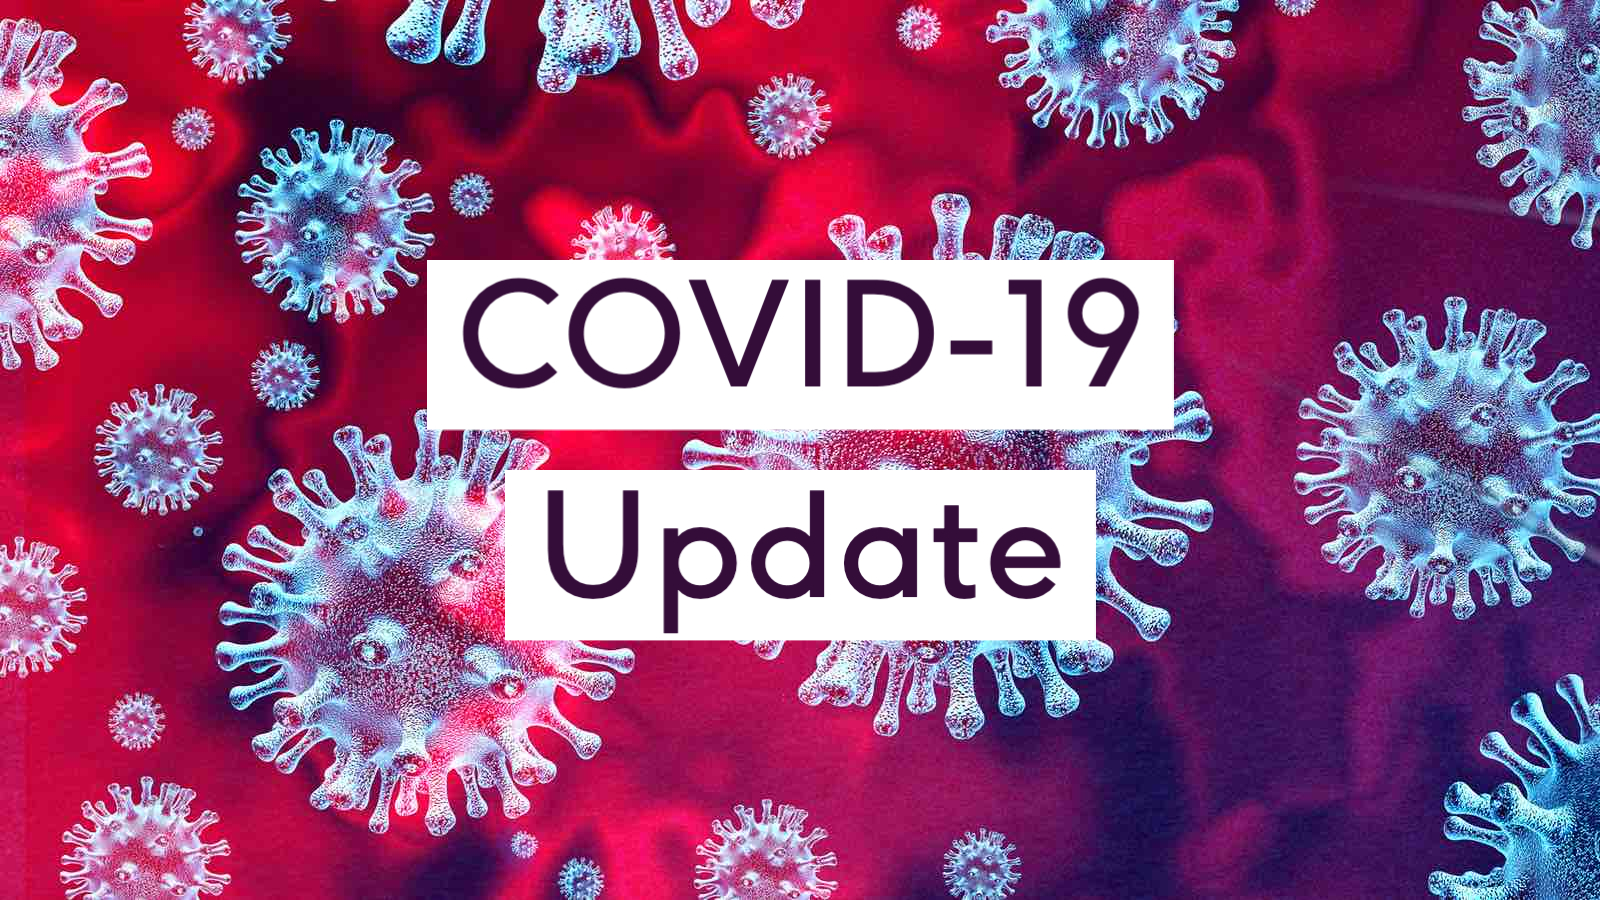 Pictures of the COVID-19 virus with the words "COVID-19 Update" in front of it